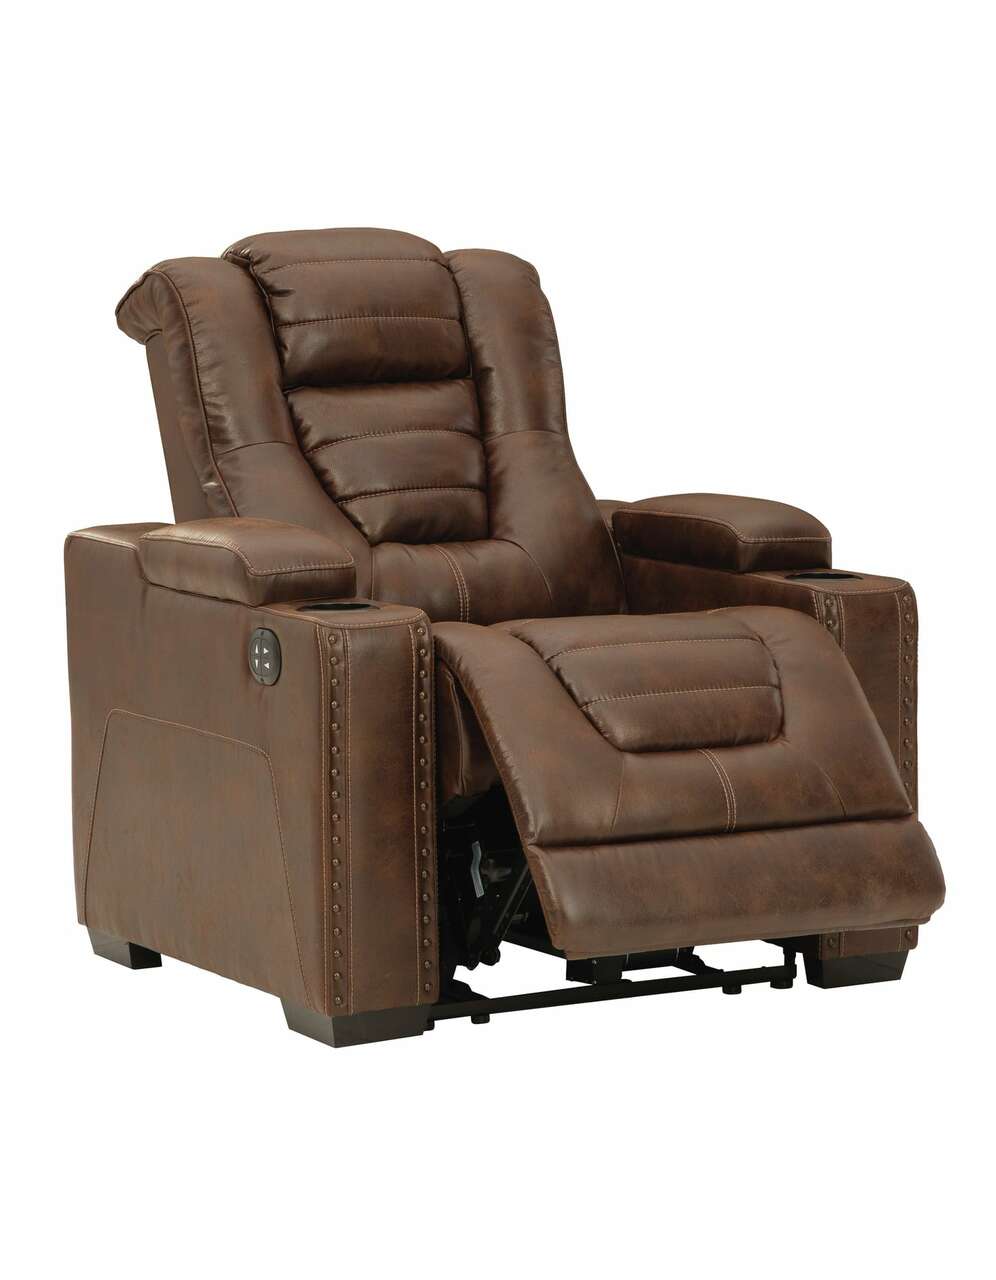 245-05-13 Owners Box Thyme Power Recliner Chair